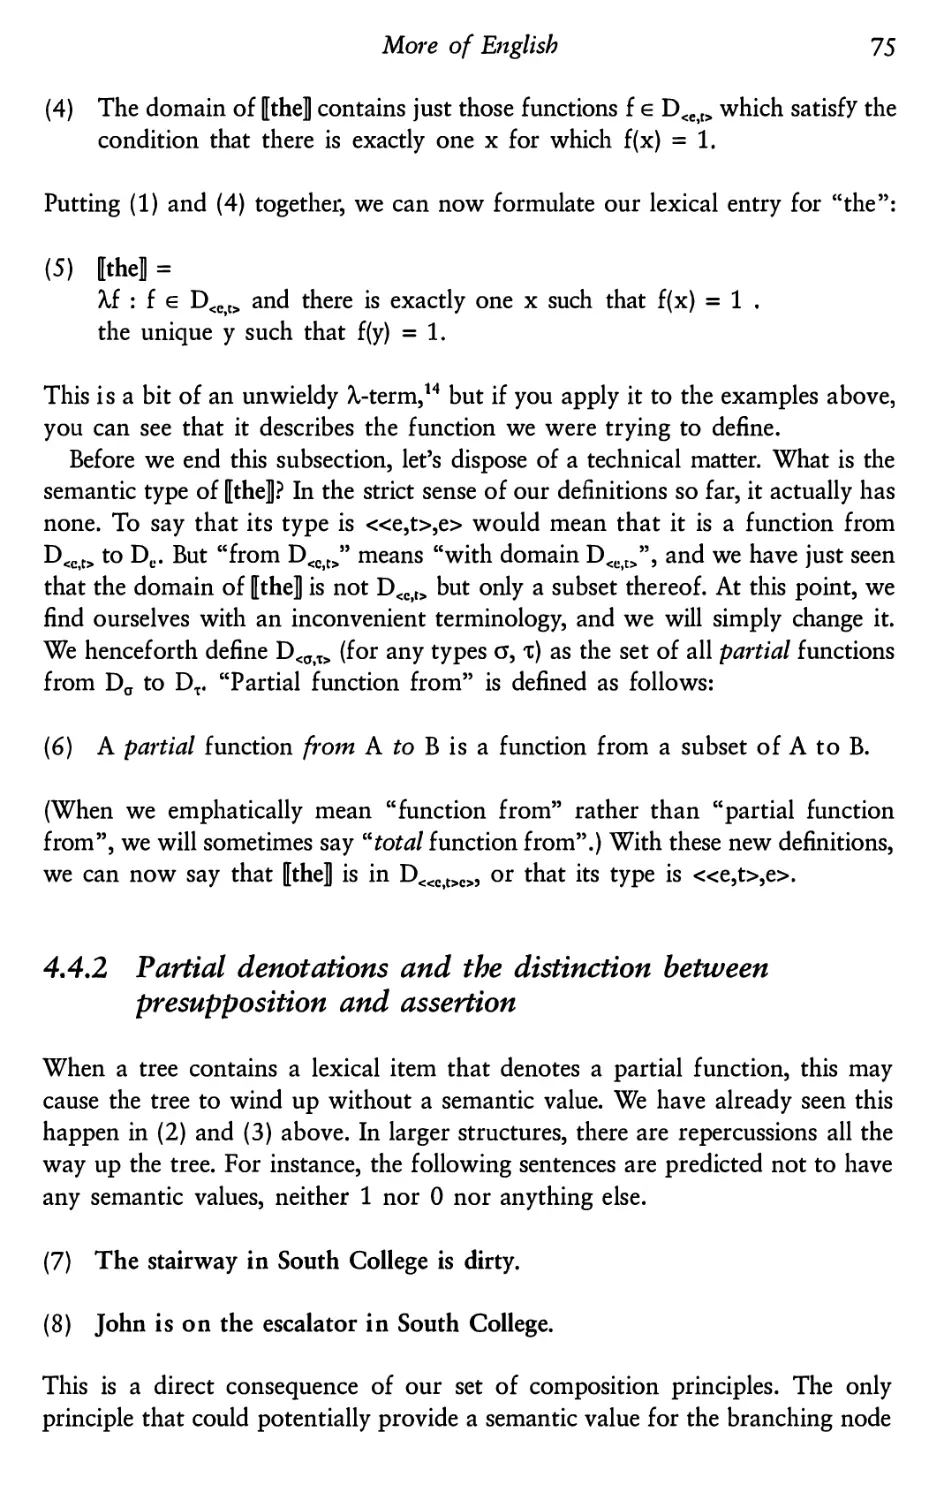 4.4.2 Partial denotations and the distinction between presupposition and assertion